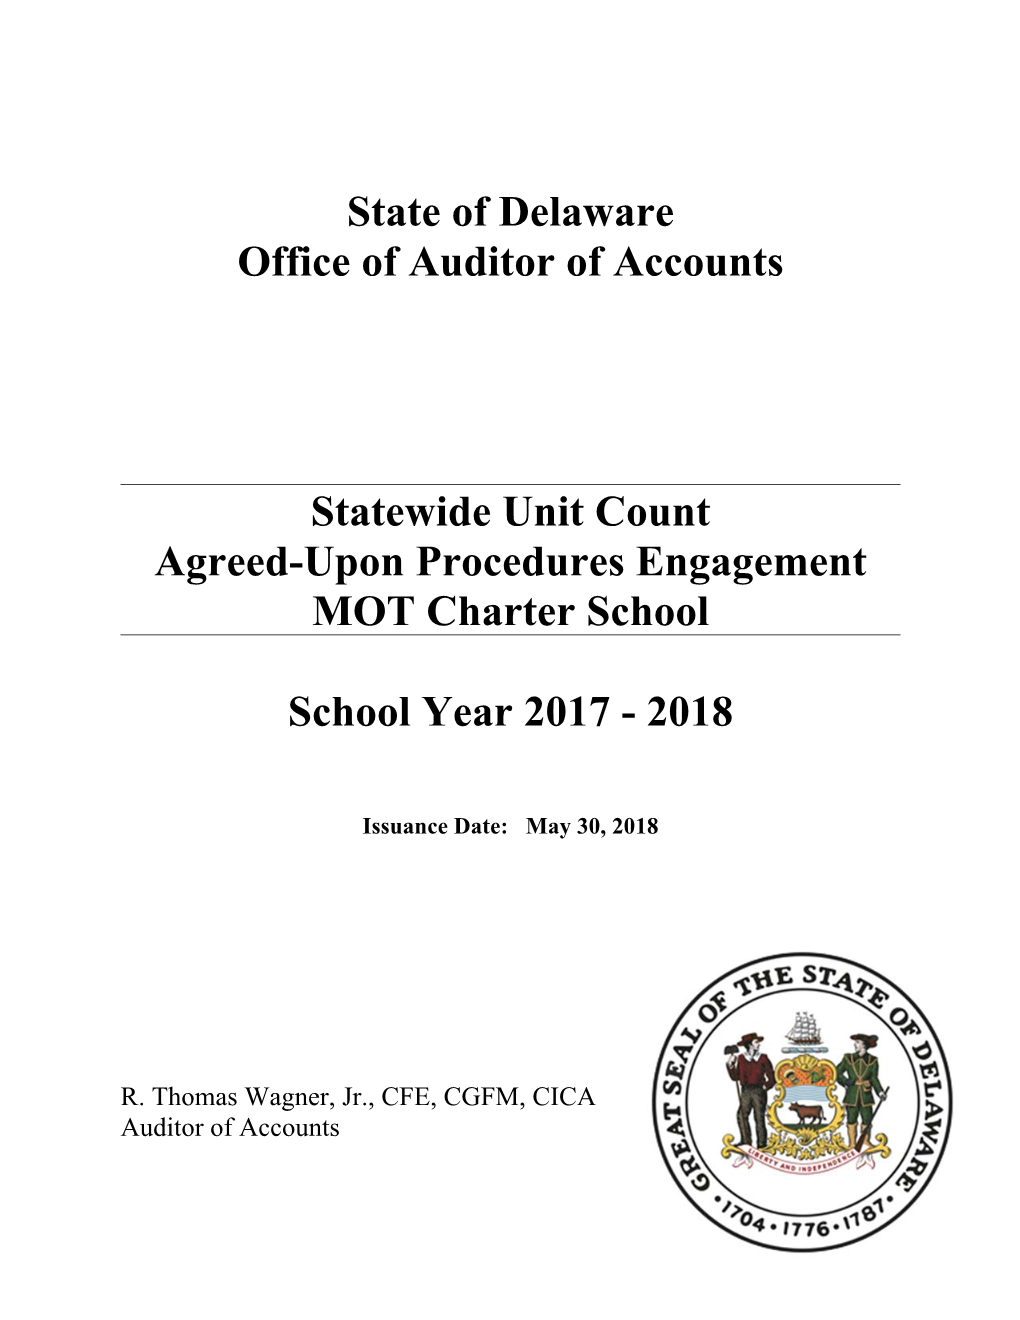 State of Delaware Office of Auditor of Accounts Statewide Unit Count Agreed-Upon Procedures Engagement MOT Charter School School